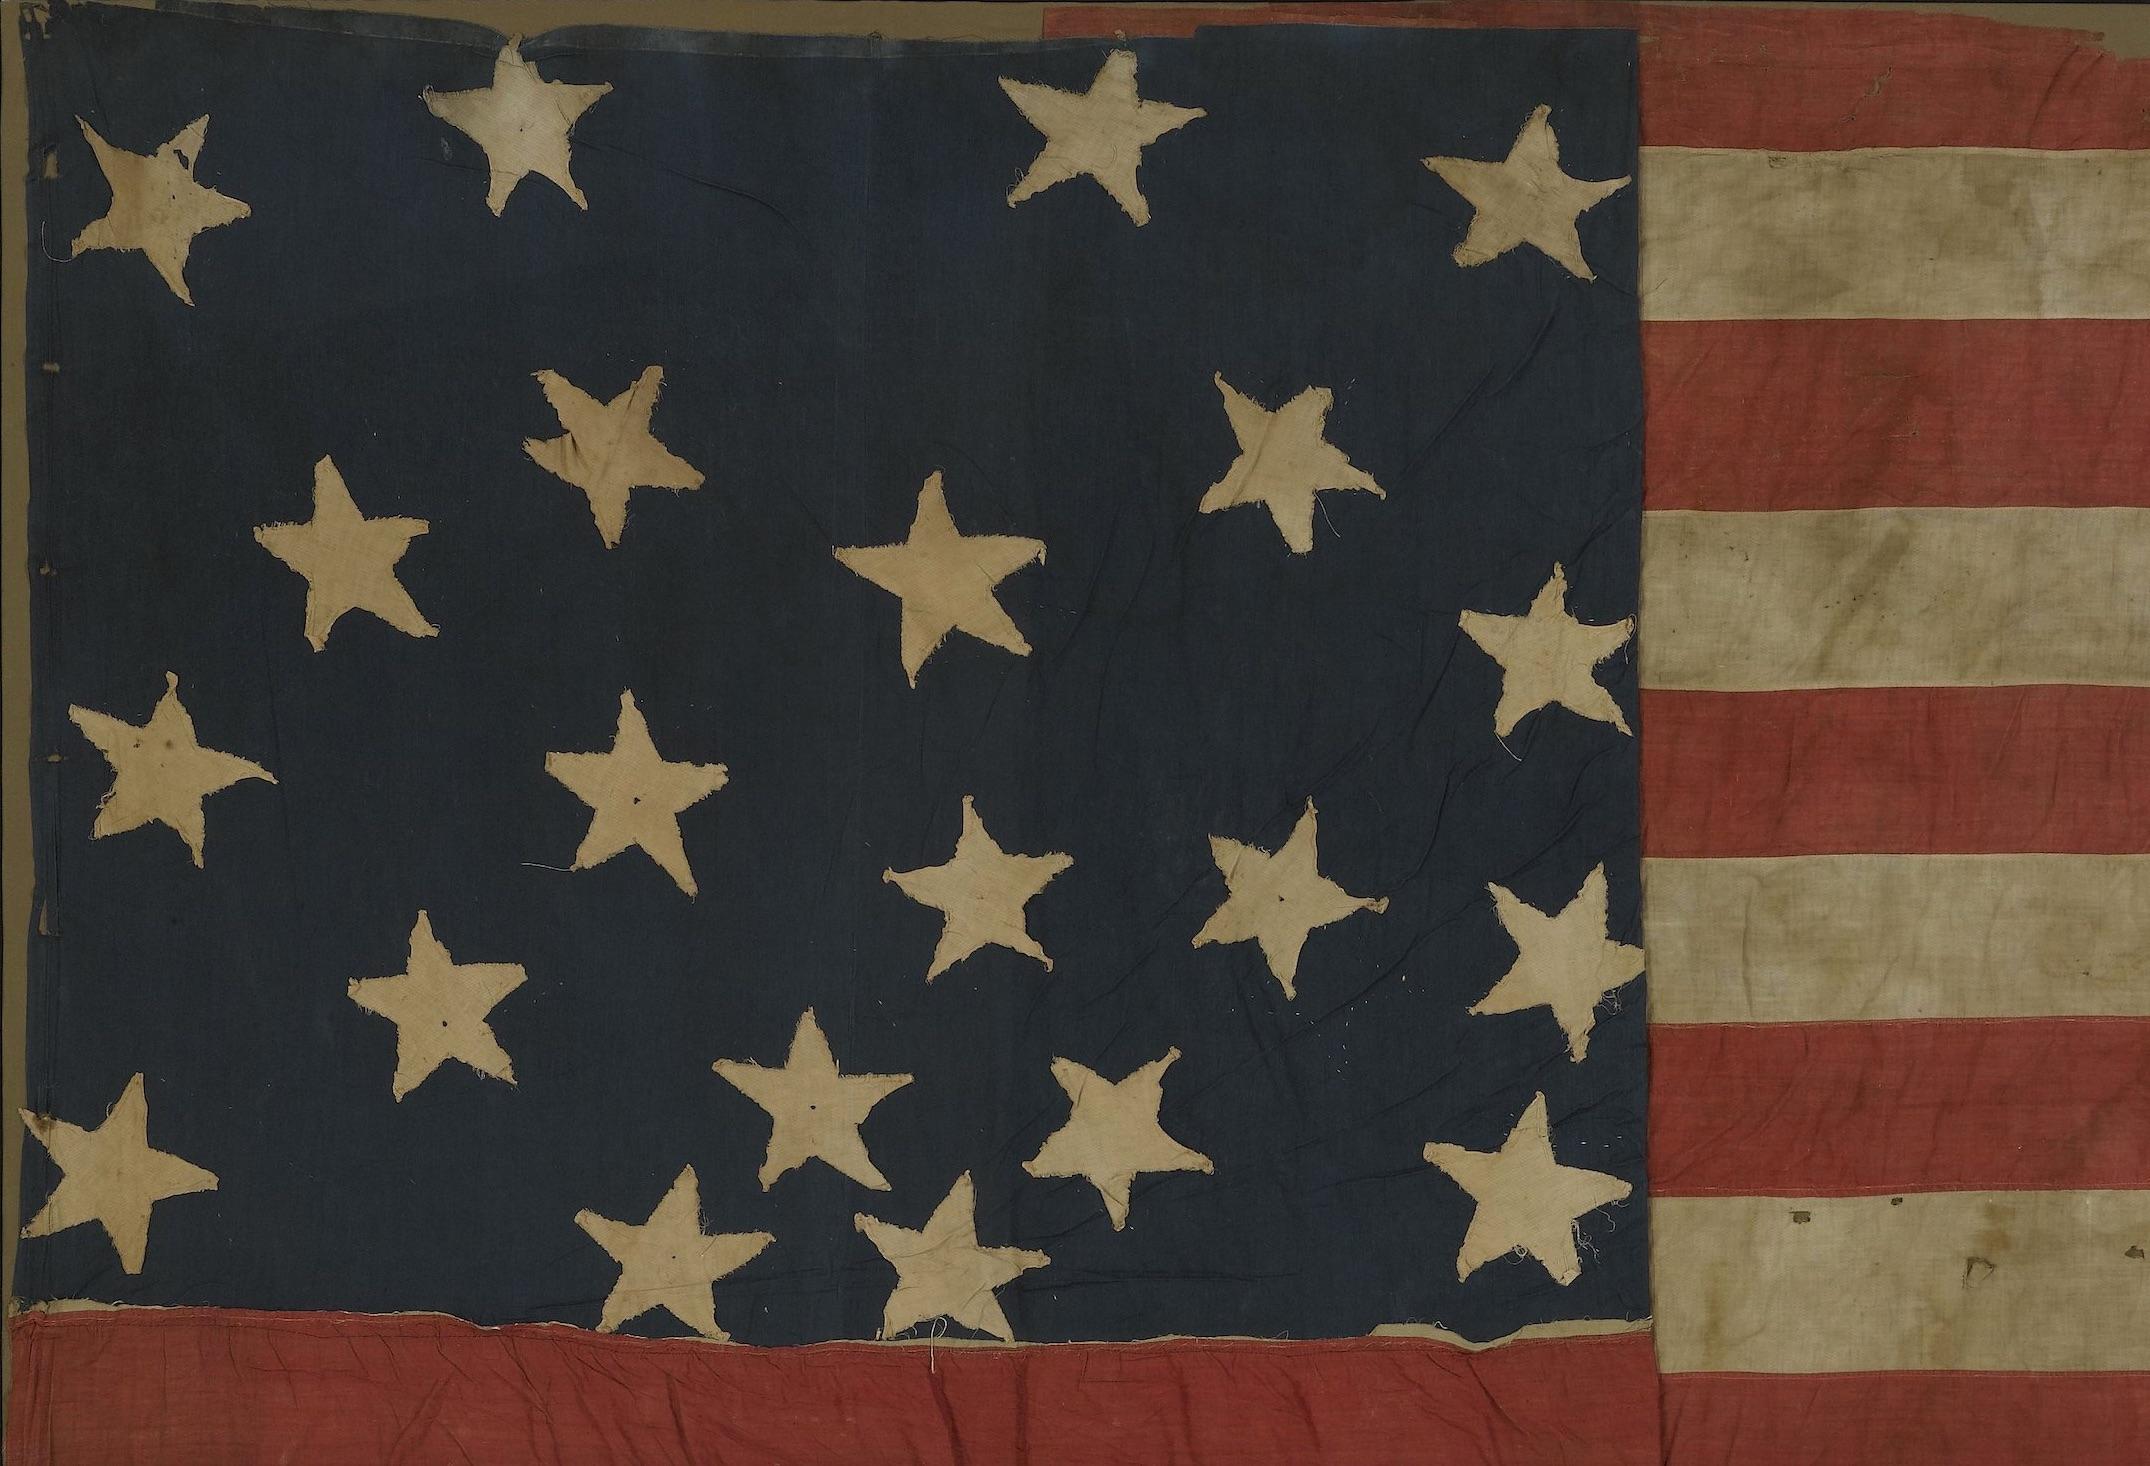 Presented is an impressive 21-star flag circa 1860-1865. This is a southern-exclusionary 21-star flag constructed during the period of the American Civil War. The number of stars on this flag represent the number of states that remained loyal to the